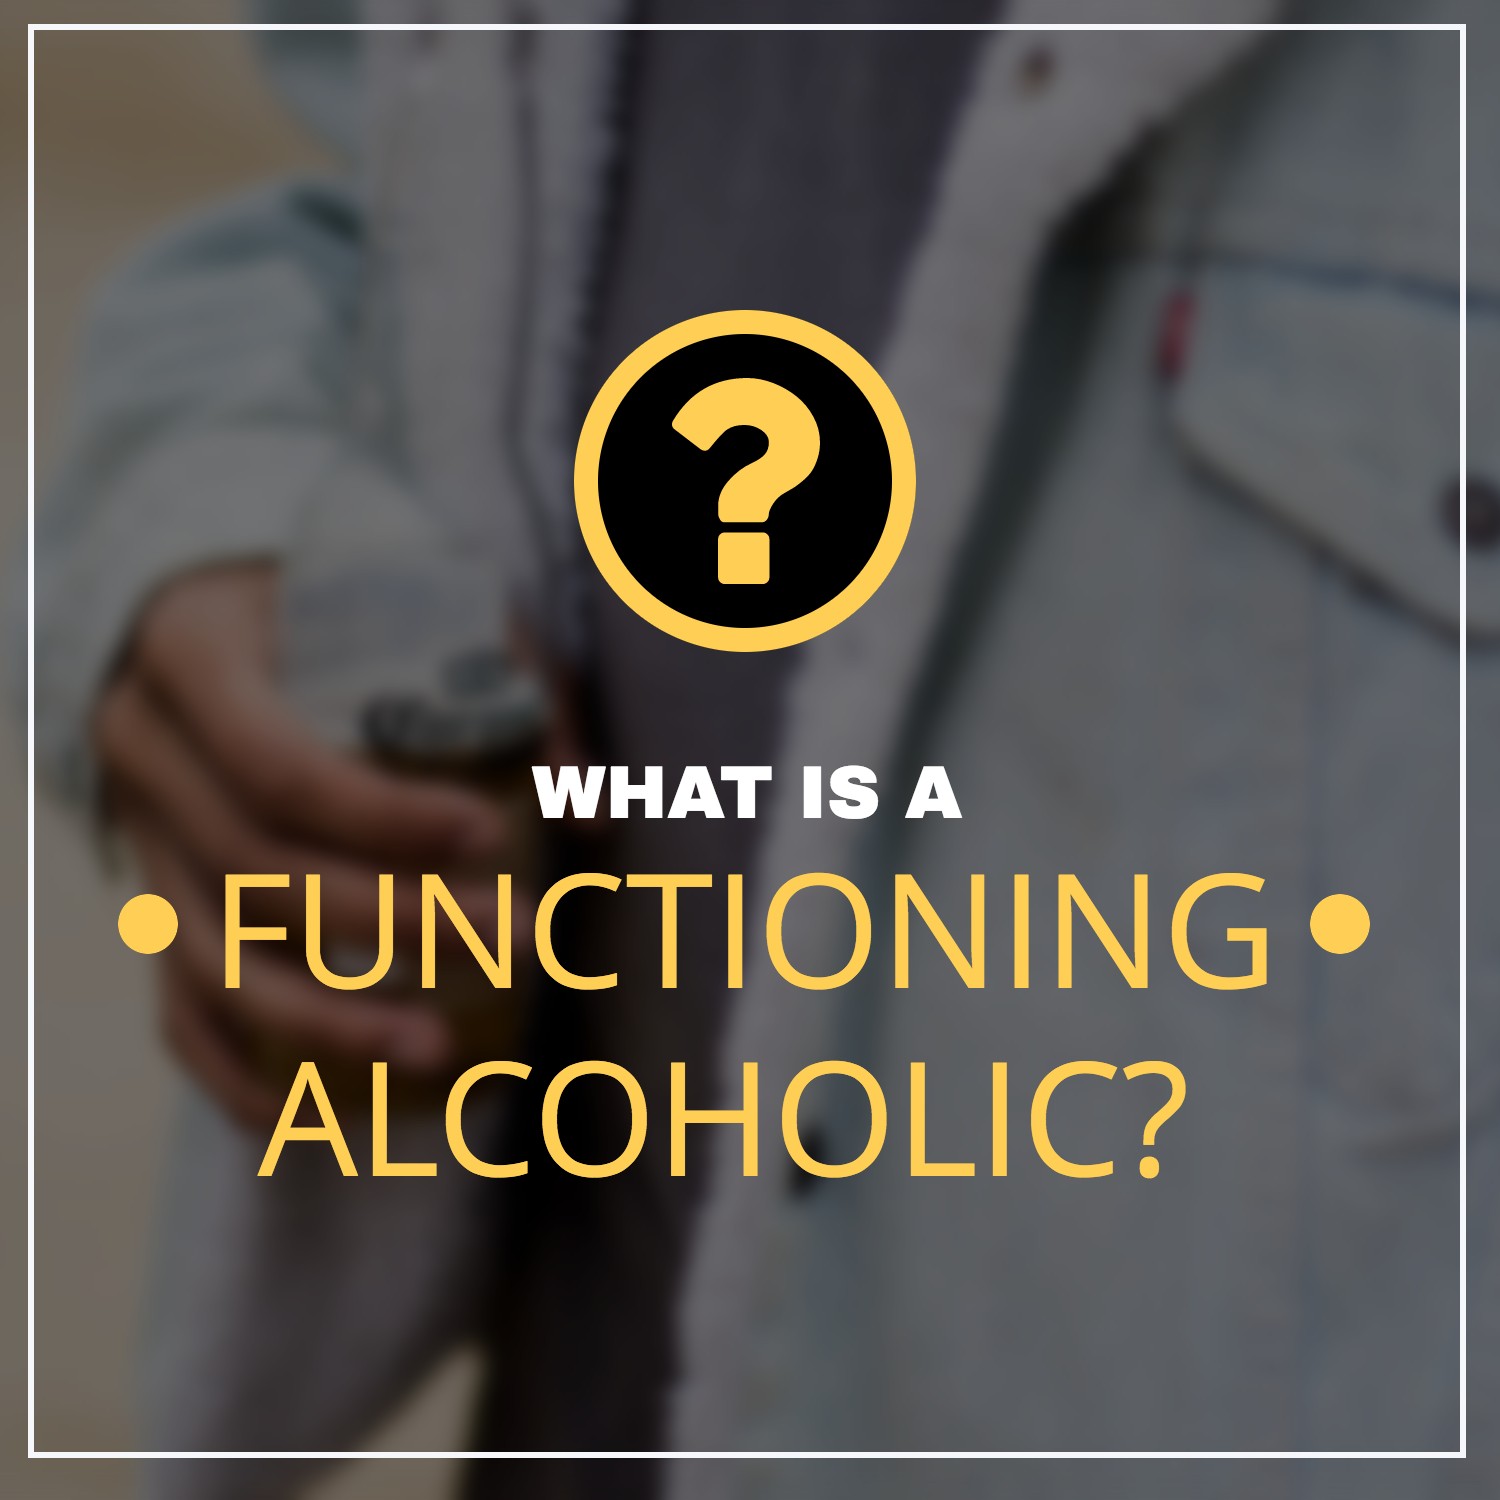 What is a functioning alcoholic?